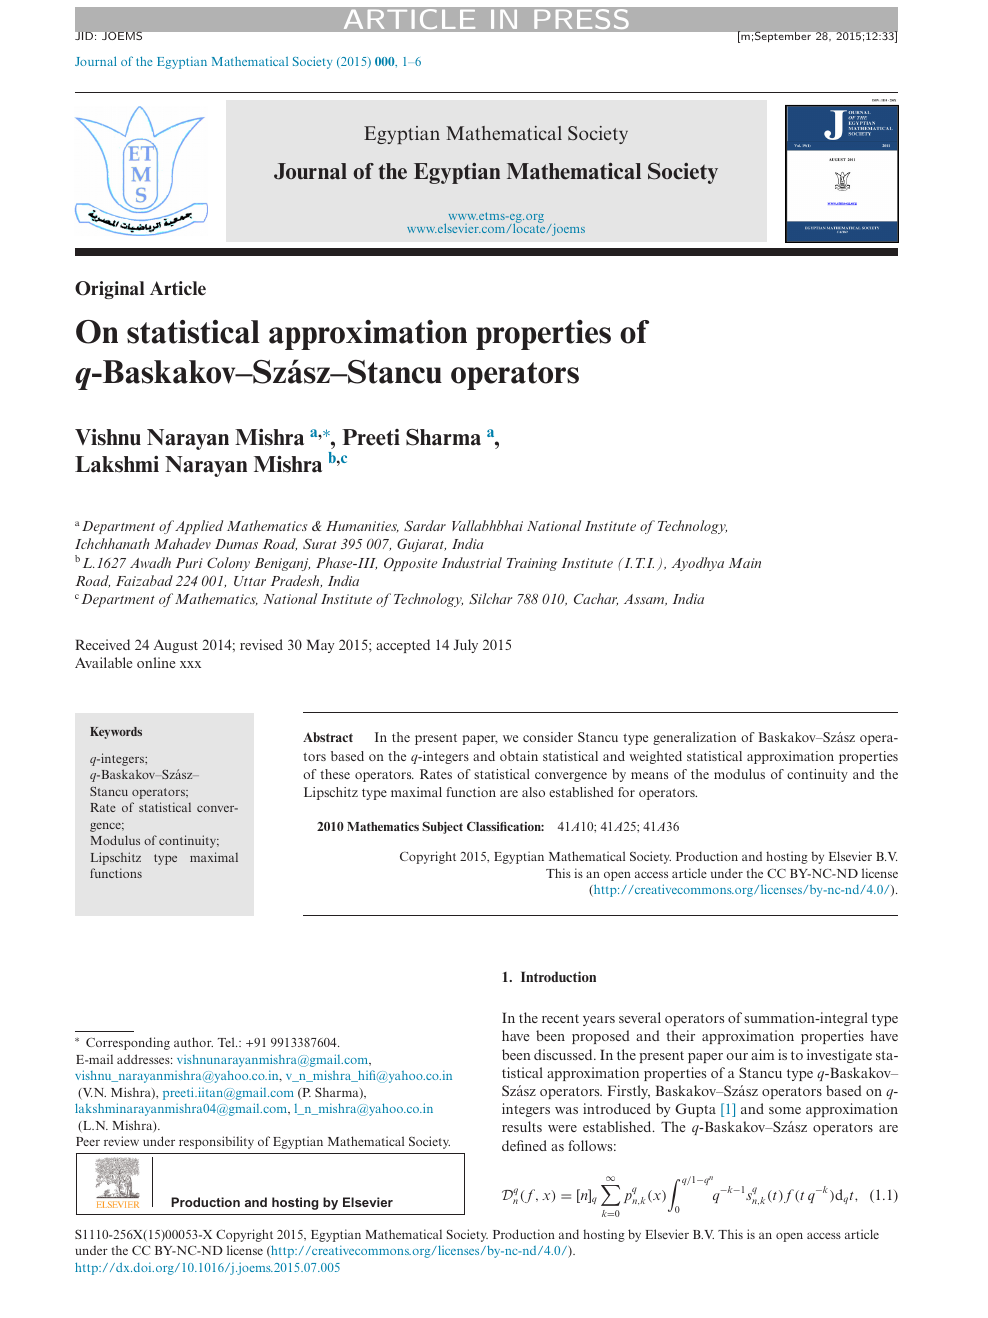 On Statistical Approximation Properties Of Q Baskakov Szasz Stancu Operators Topic Of Research Paper In Mathematics Download Scholarly Article Pdf And Read For Free On Cyberleninka Open Science Hub